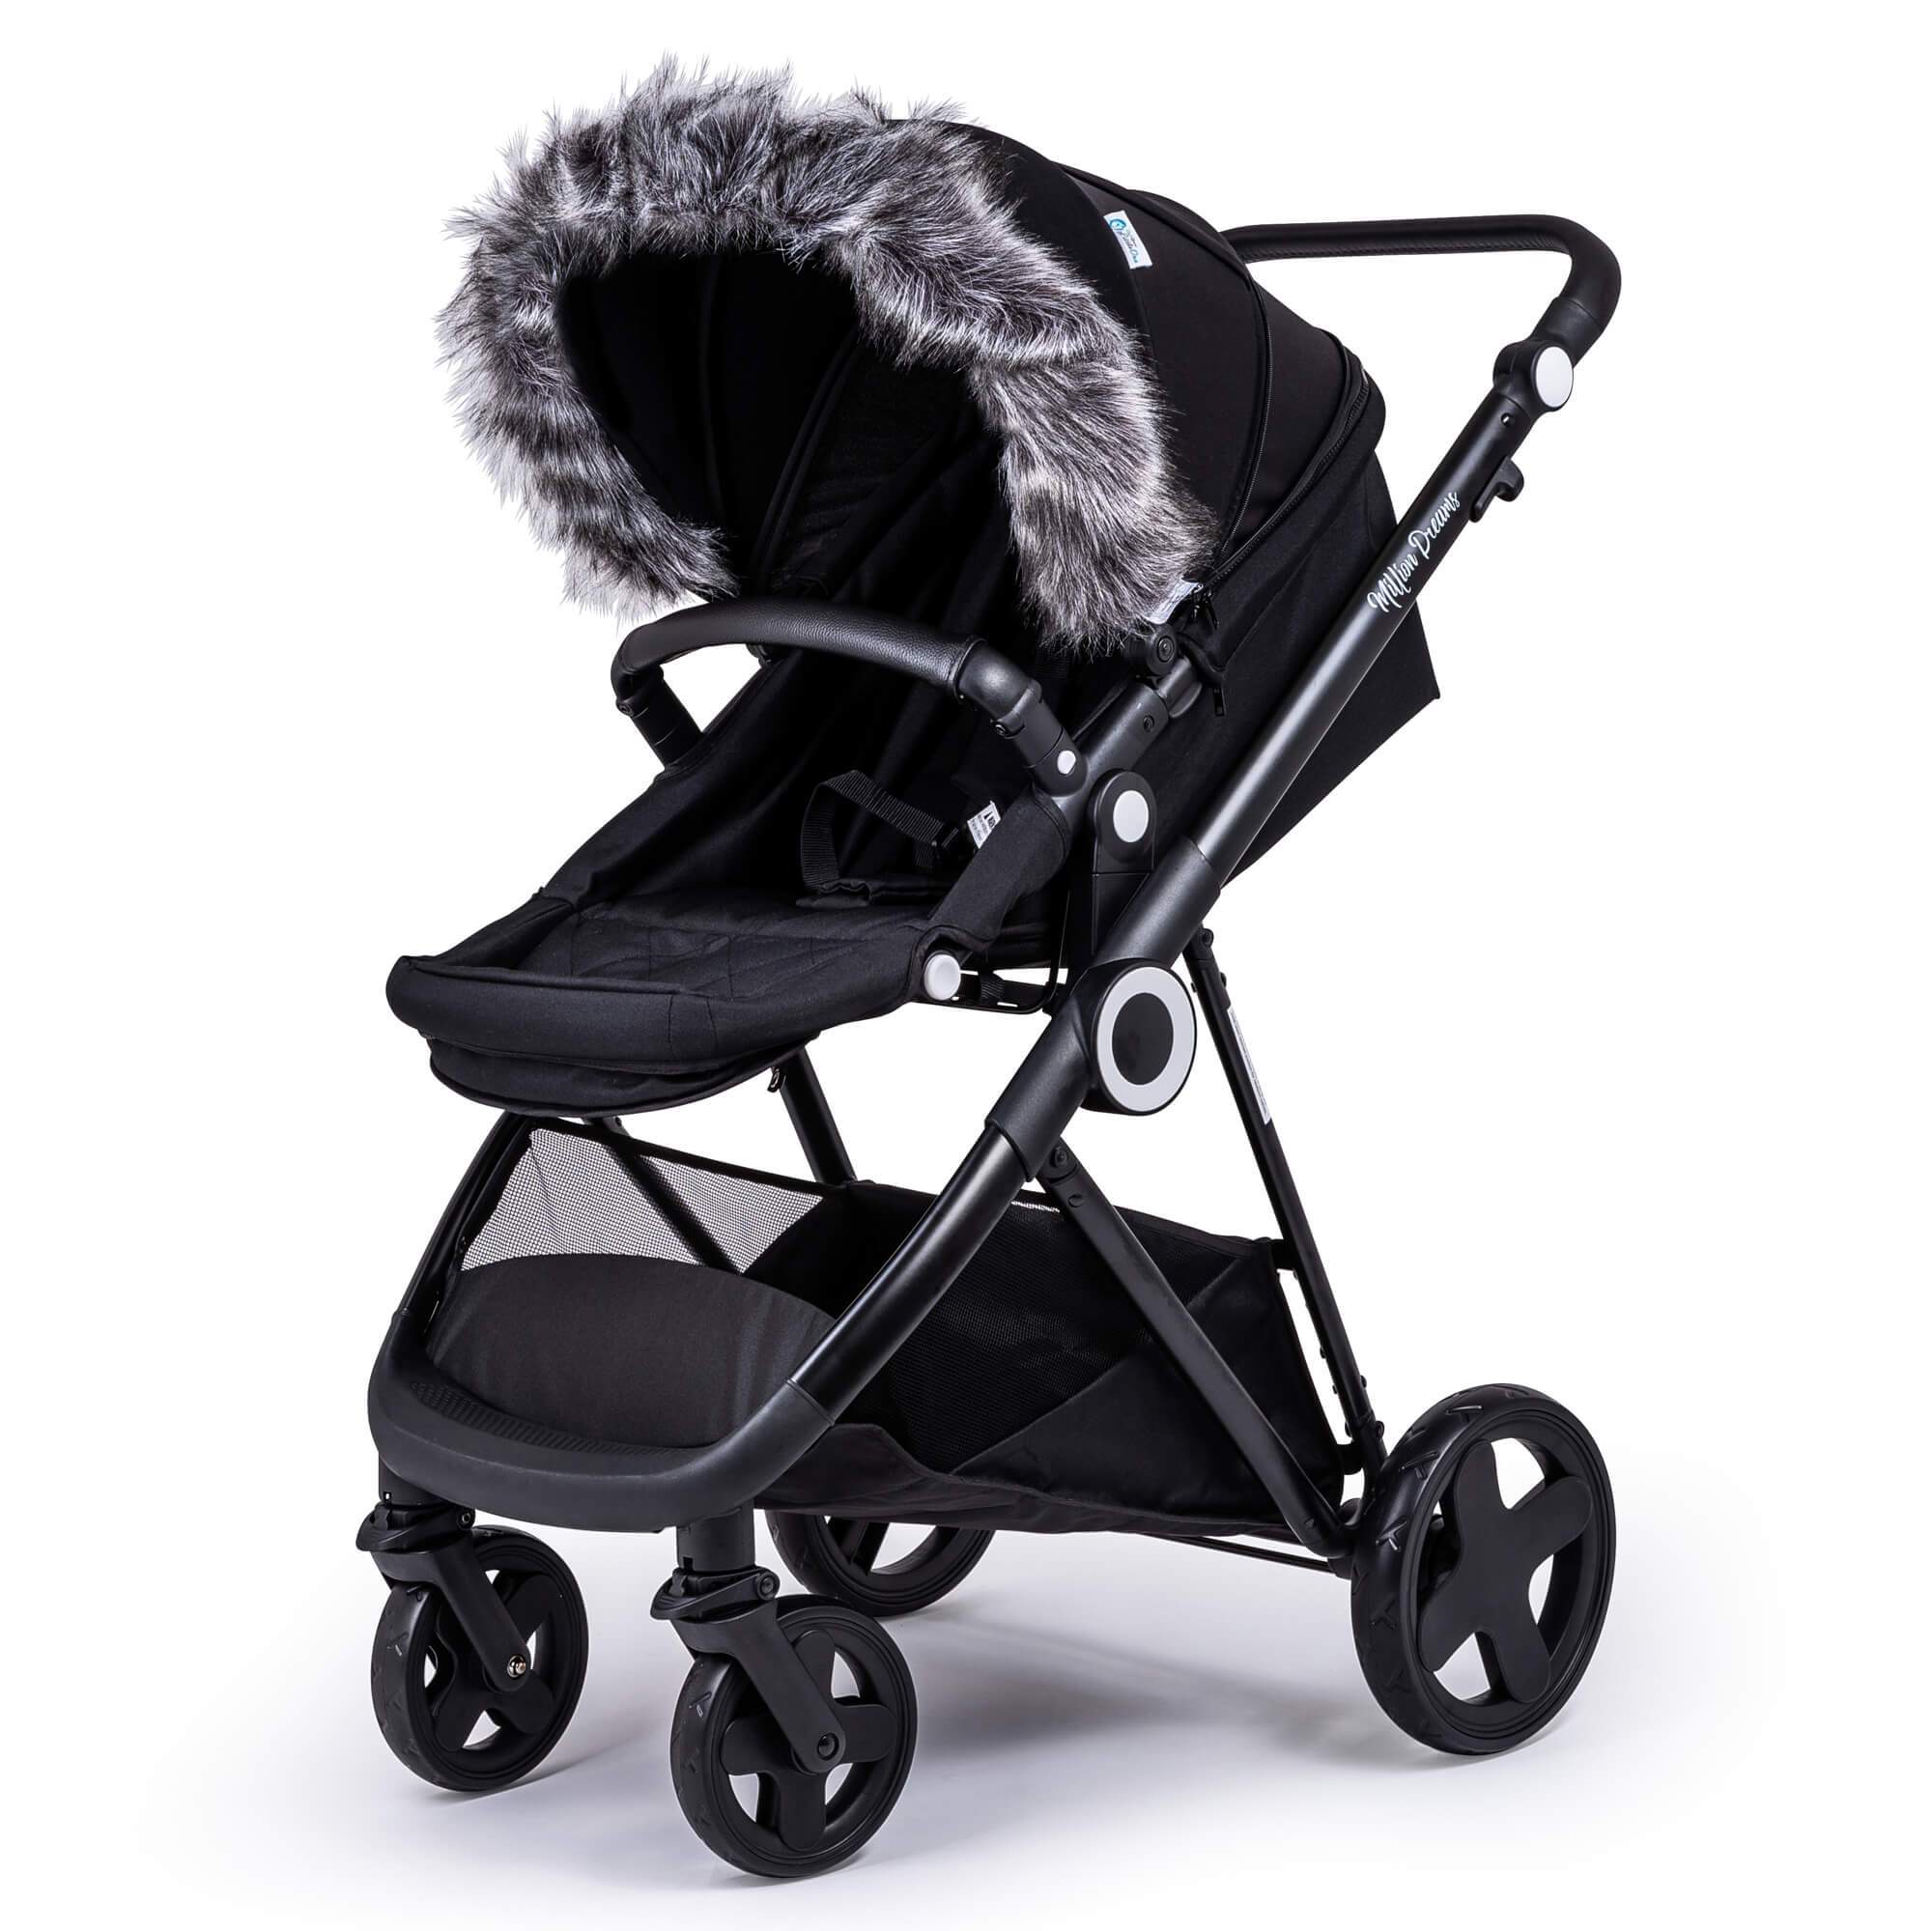 Pram Fur Hood Trim Attachment for Pushchair Compatible with Mutsy - Dark Grey / Fits All Models | For Your Little One